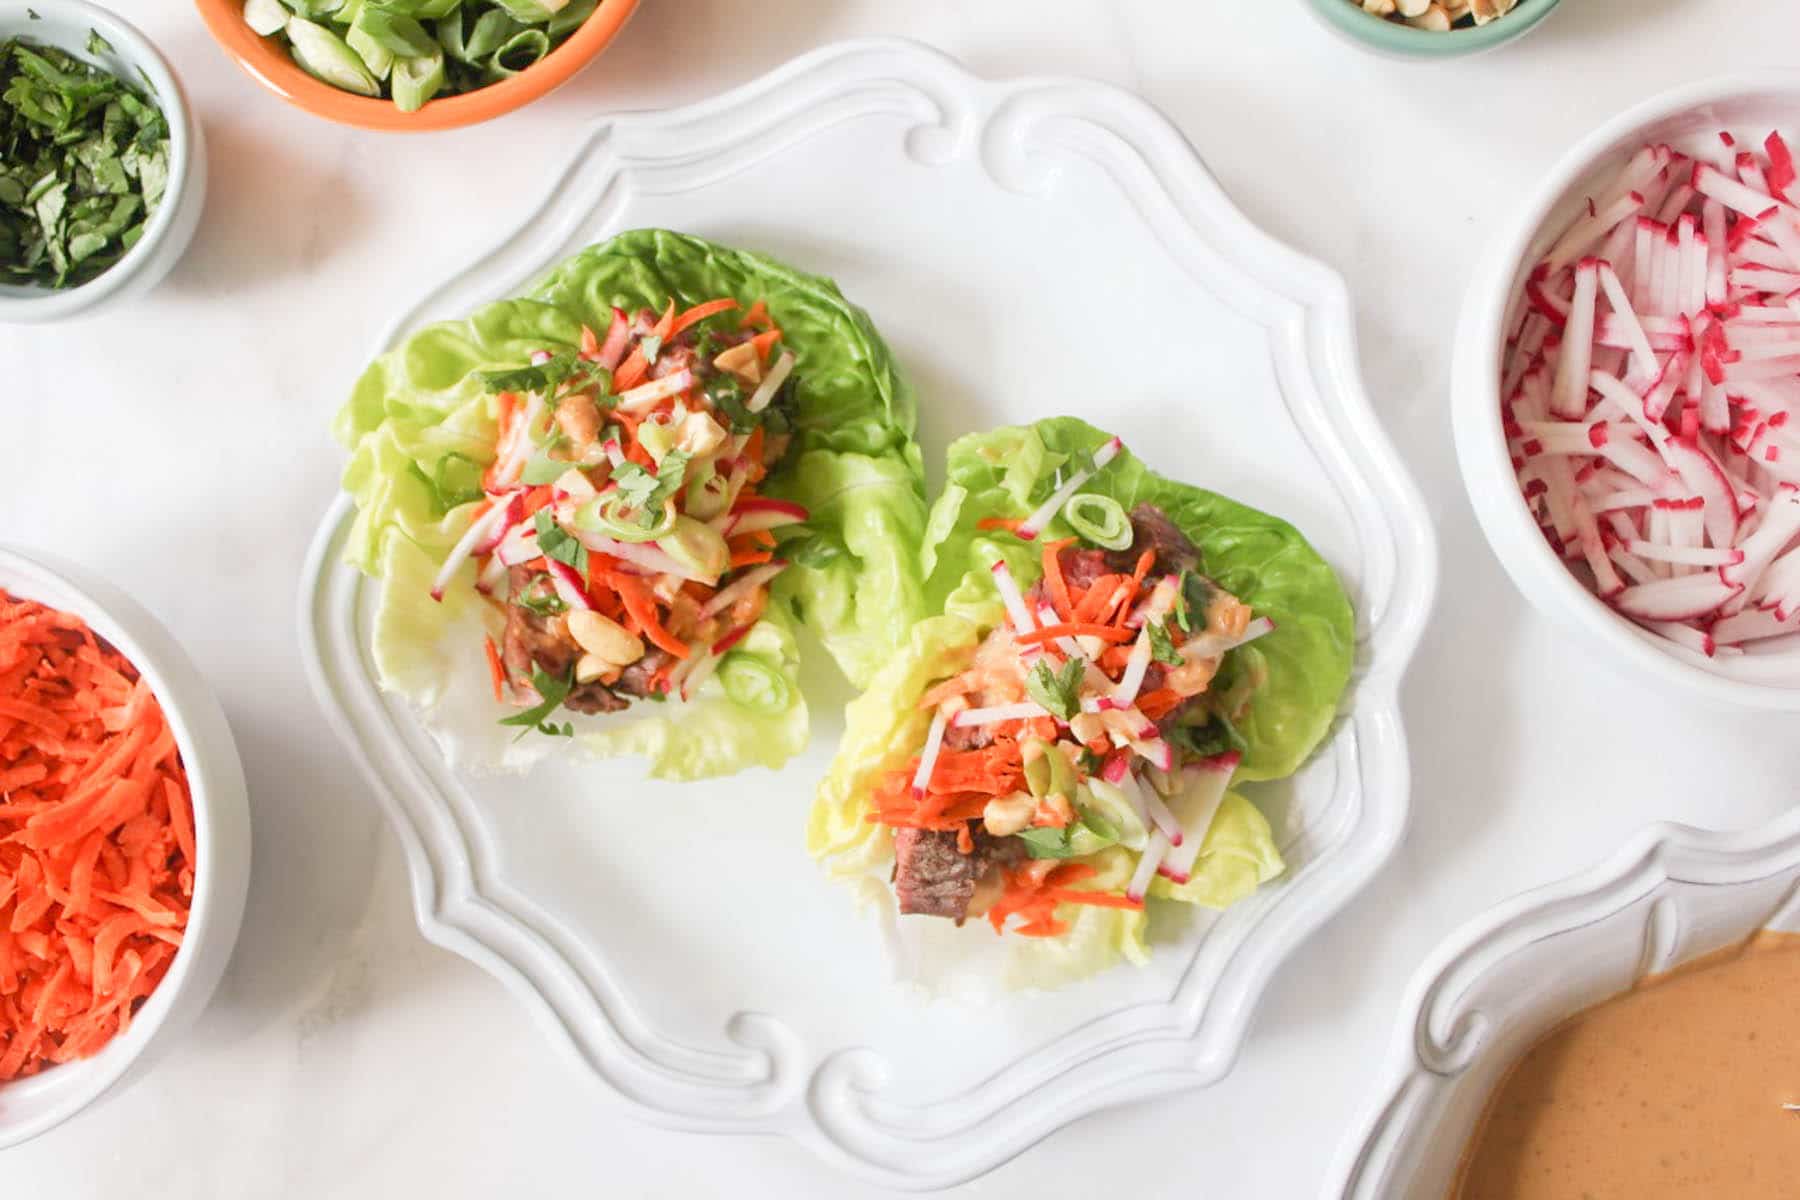 Lettuce-Wraps-with-Five-Spice-Flank-Steak-and-Peanut-Sauce-6